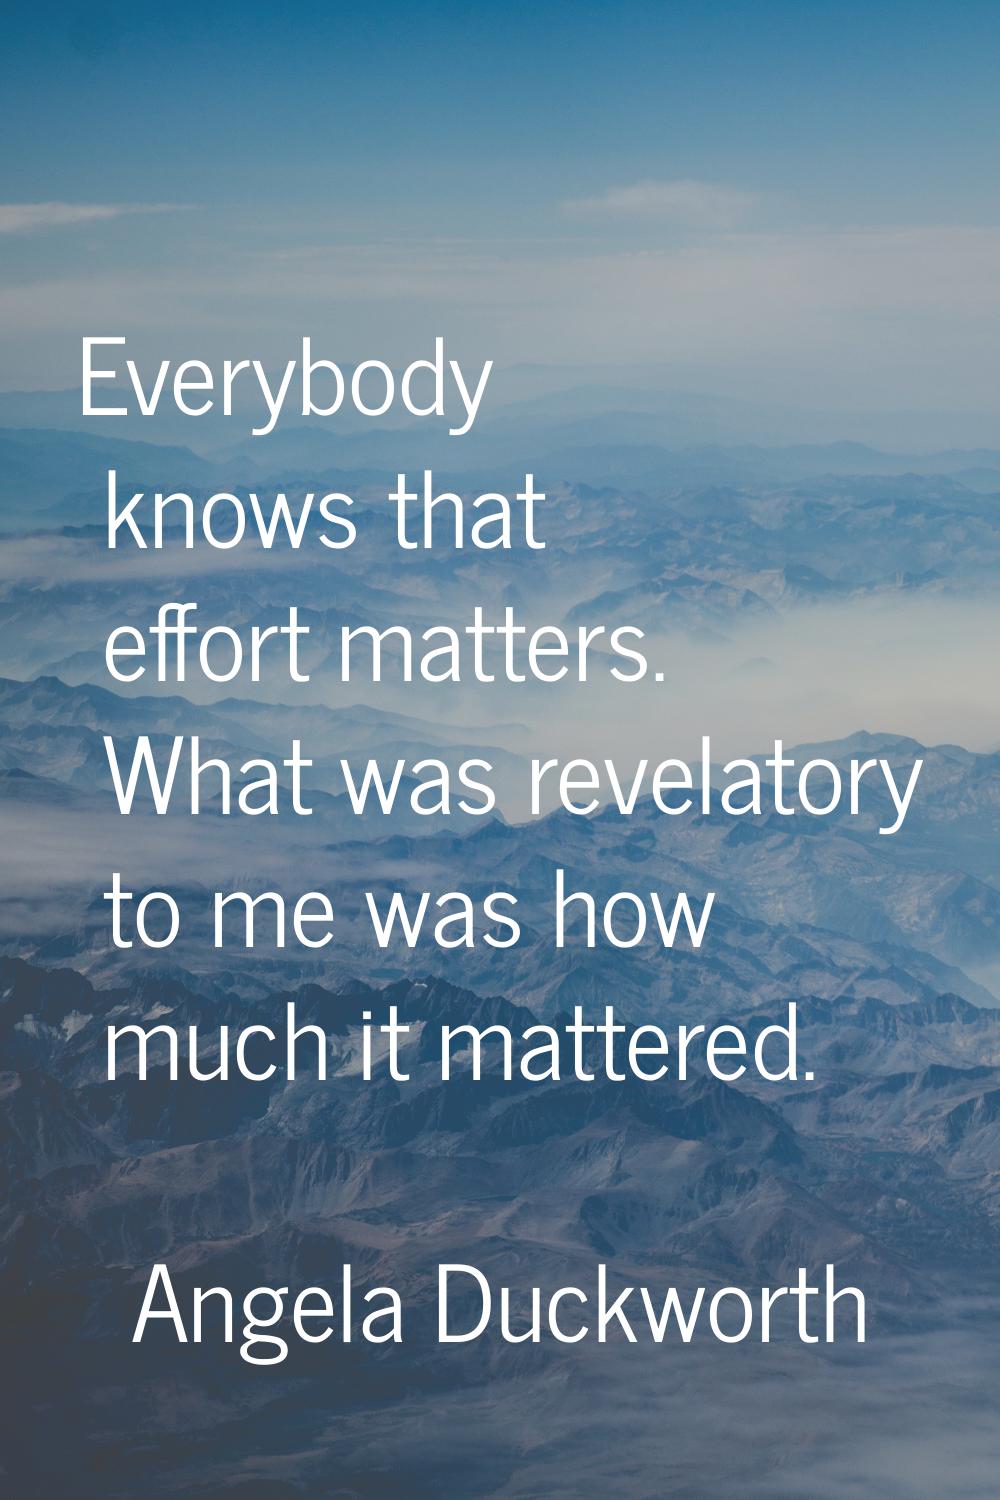 Everybody knows that effort matters. What was revelatory to me was how much it mattered.